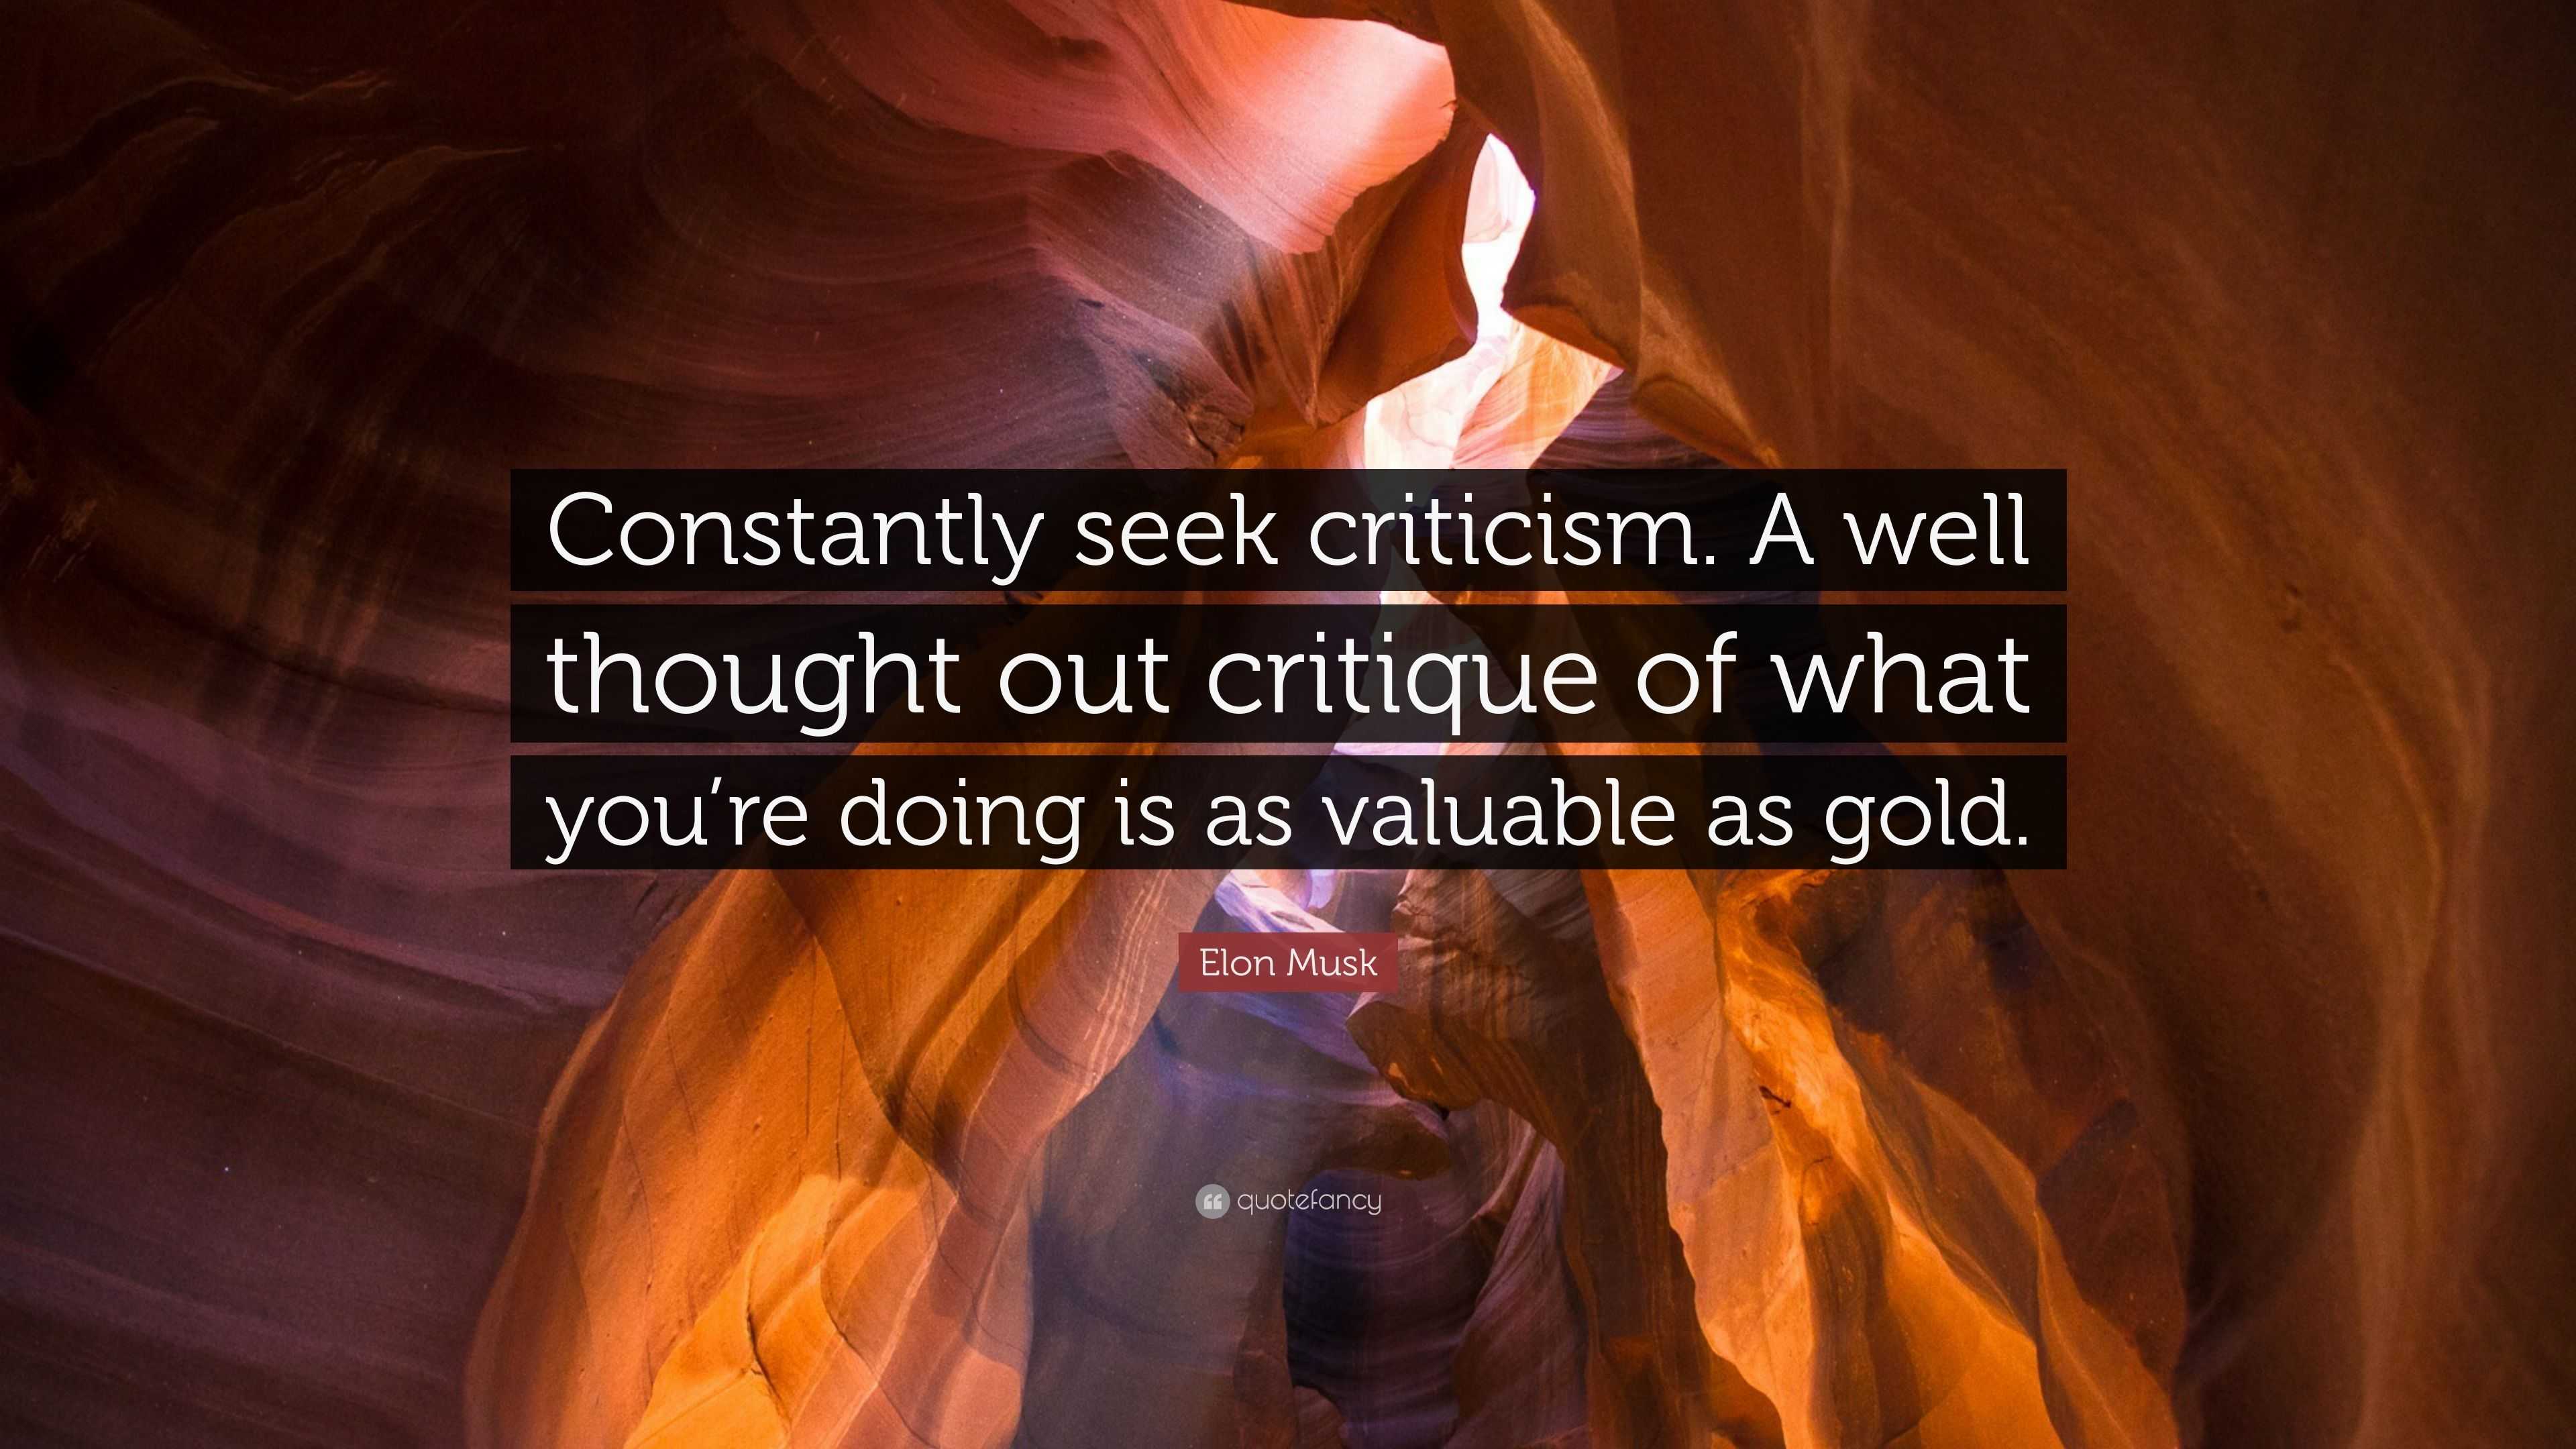 Elon Musk Quote “constantly Seek Criticism A Well Thought Out Critique Of What Youre Doing Is